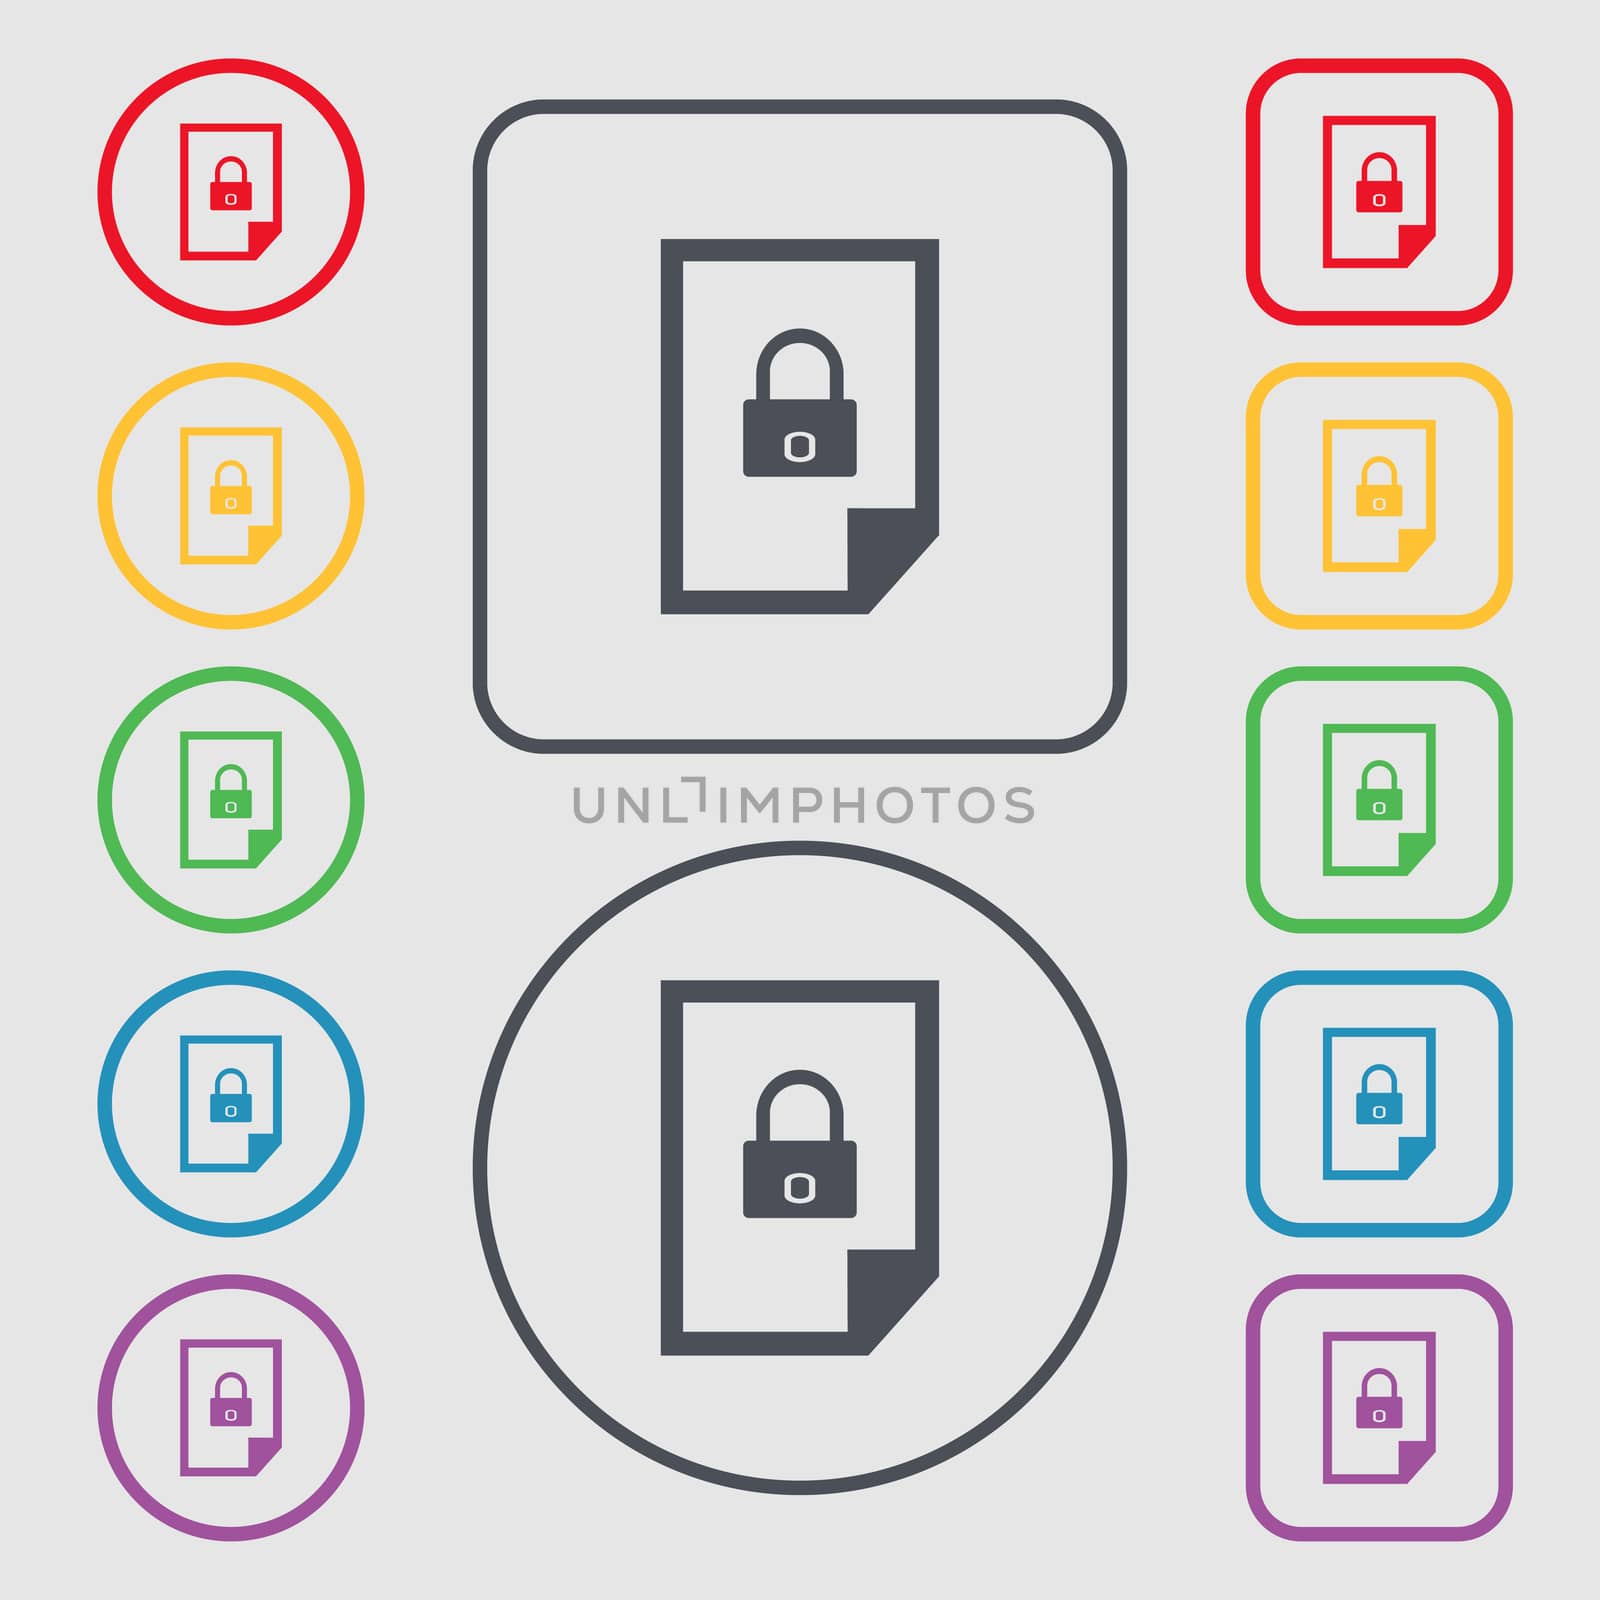 File locked icon sign. Symbols on the Round and square buttons with frame. illustration